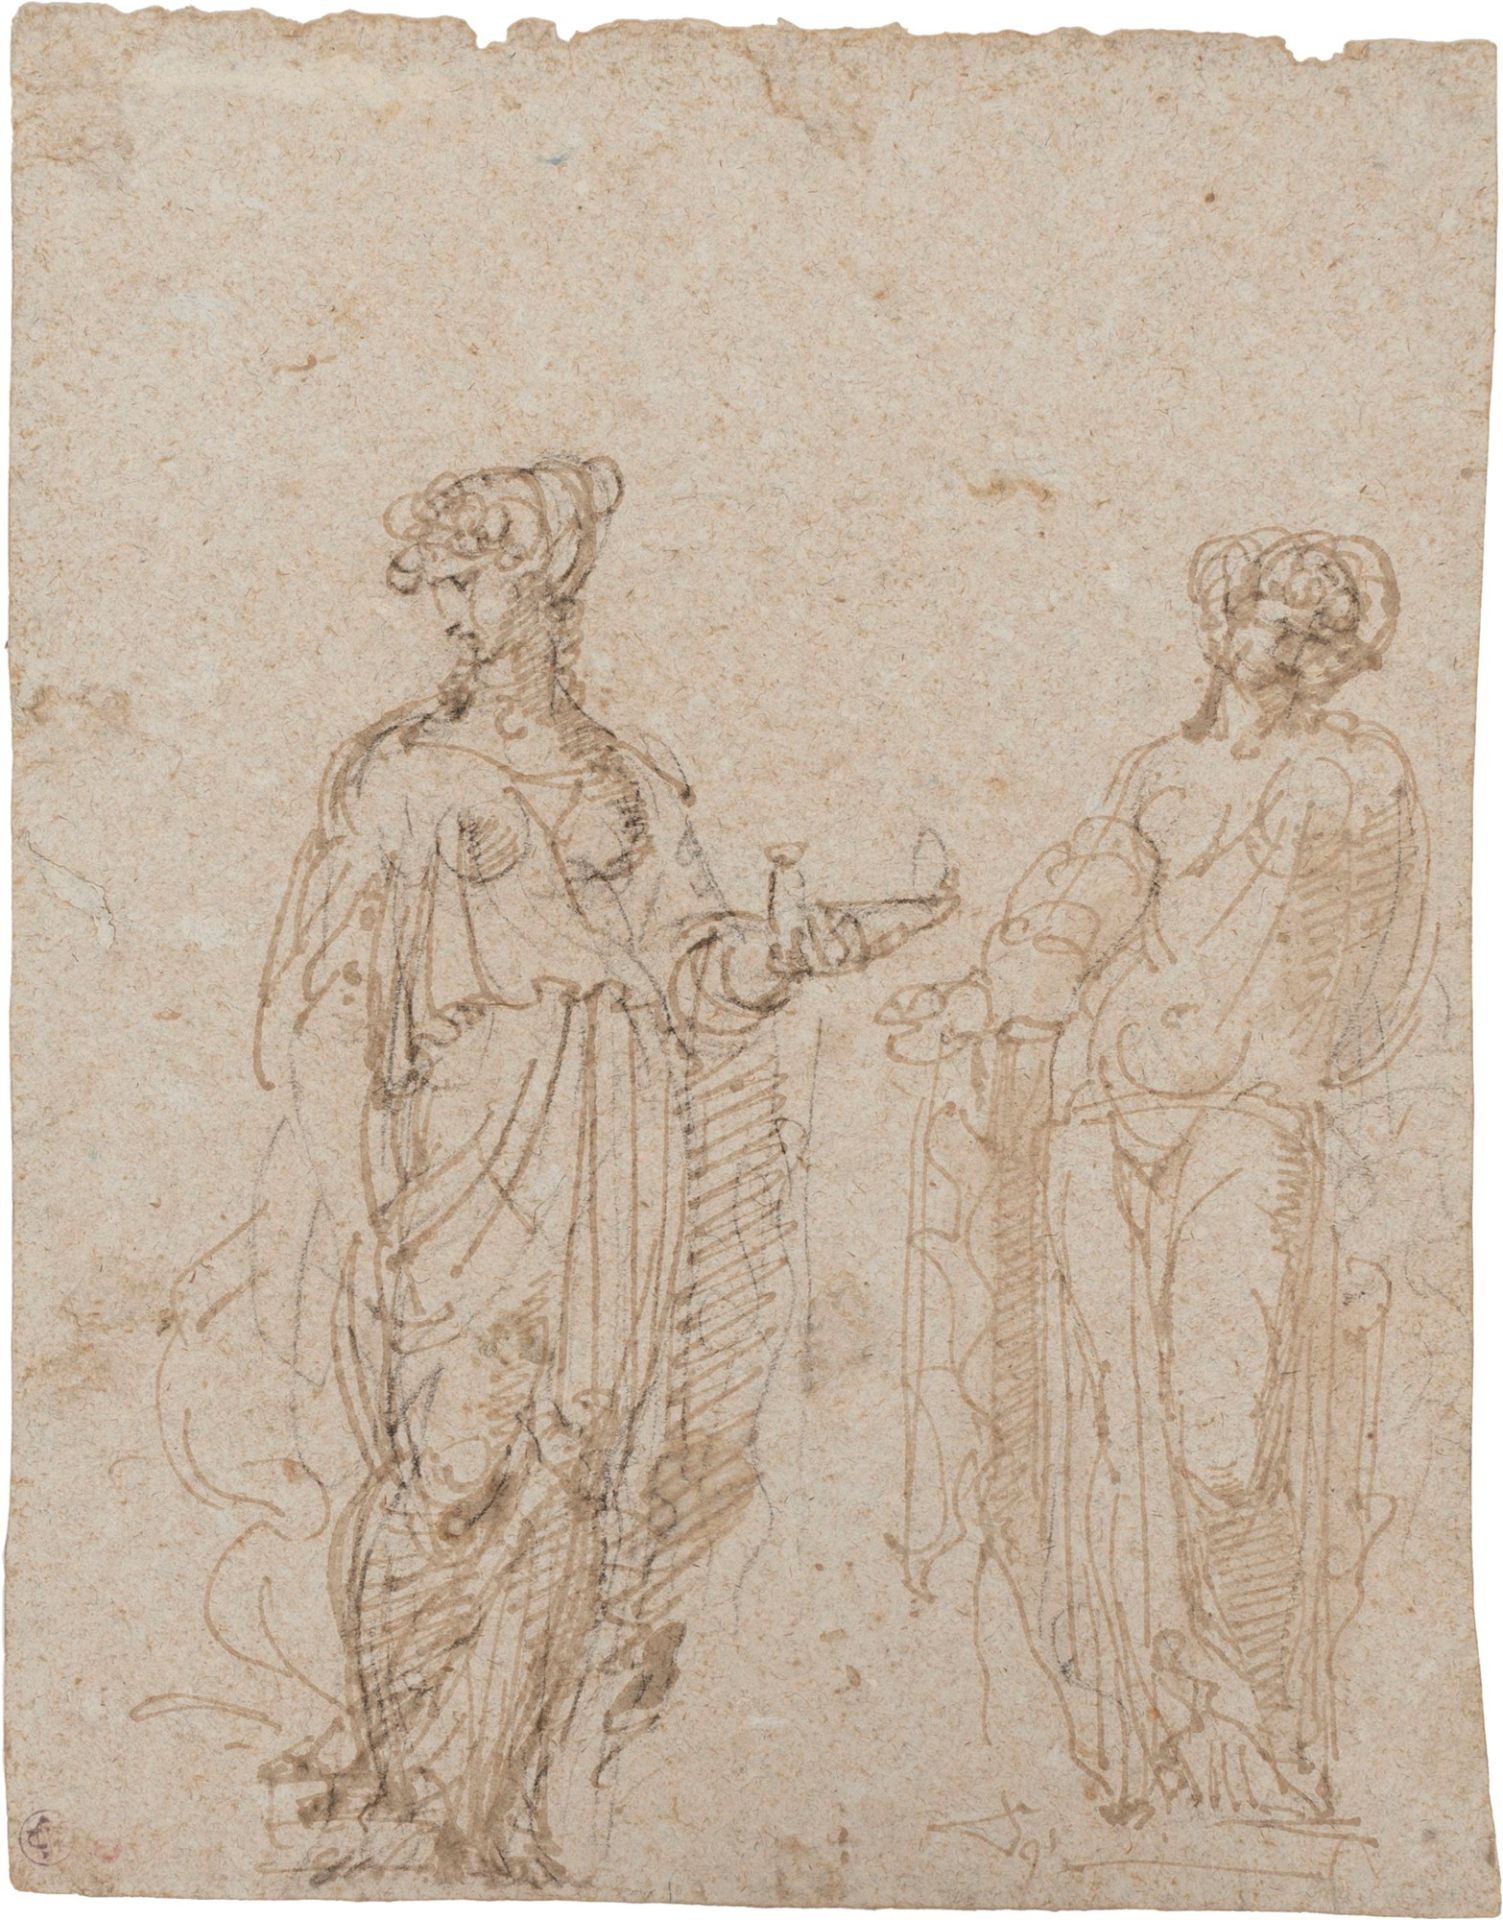 Neoclassical School - Study for figures (recto); Sketches of Figures (verso)